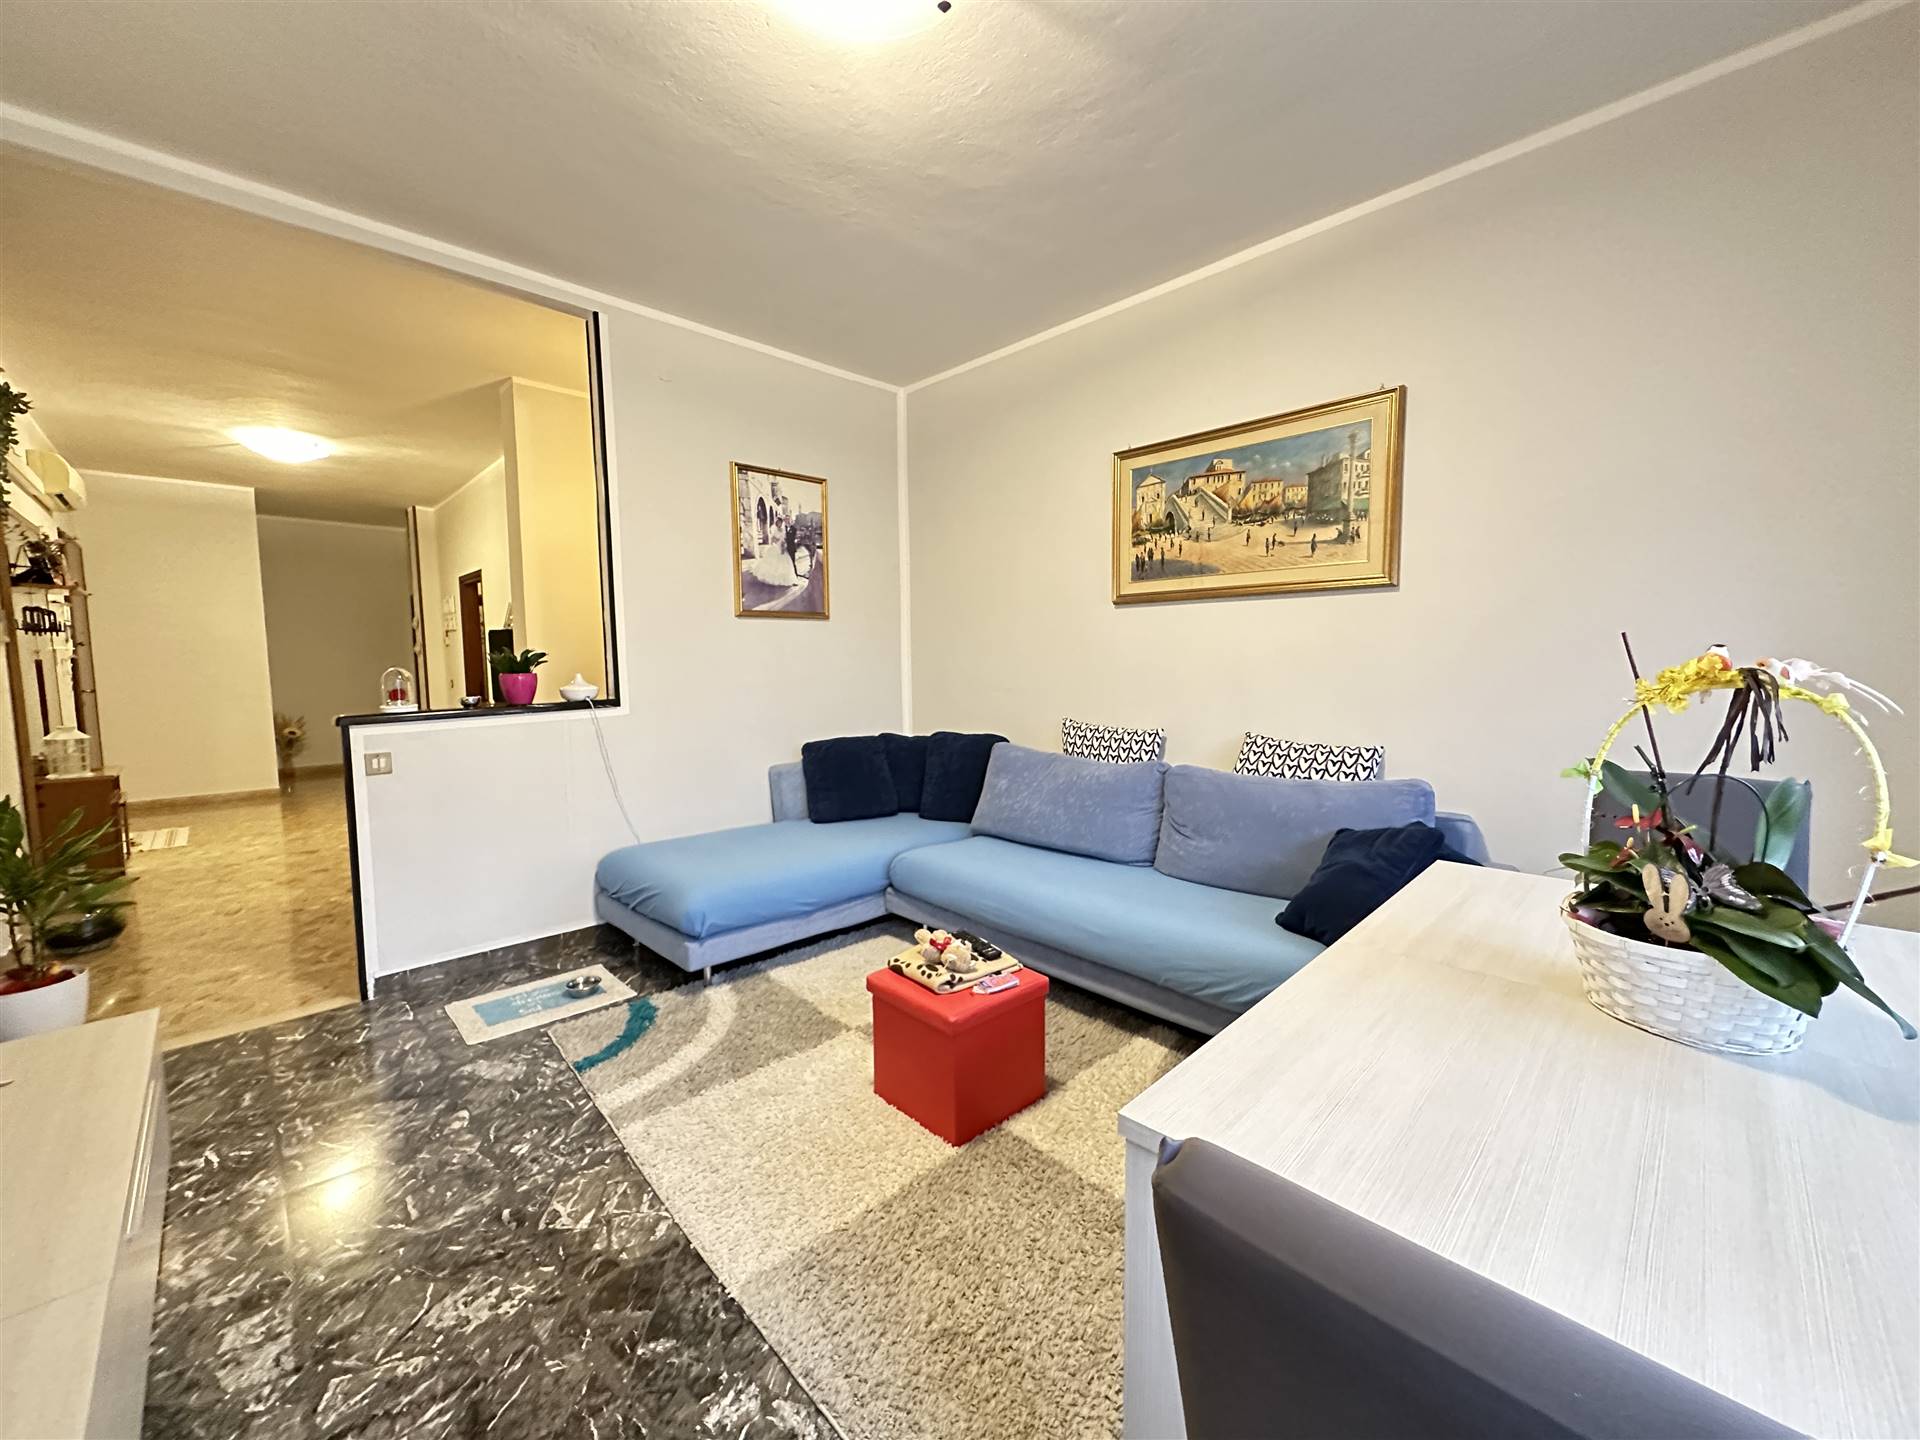 SOTTOMARINA, CHIOGGIA, Apartment for sale of 100 Sq. mt., Good condition, Heating Individual heating system, Energetic class: G, placed at 2° on 4, 